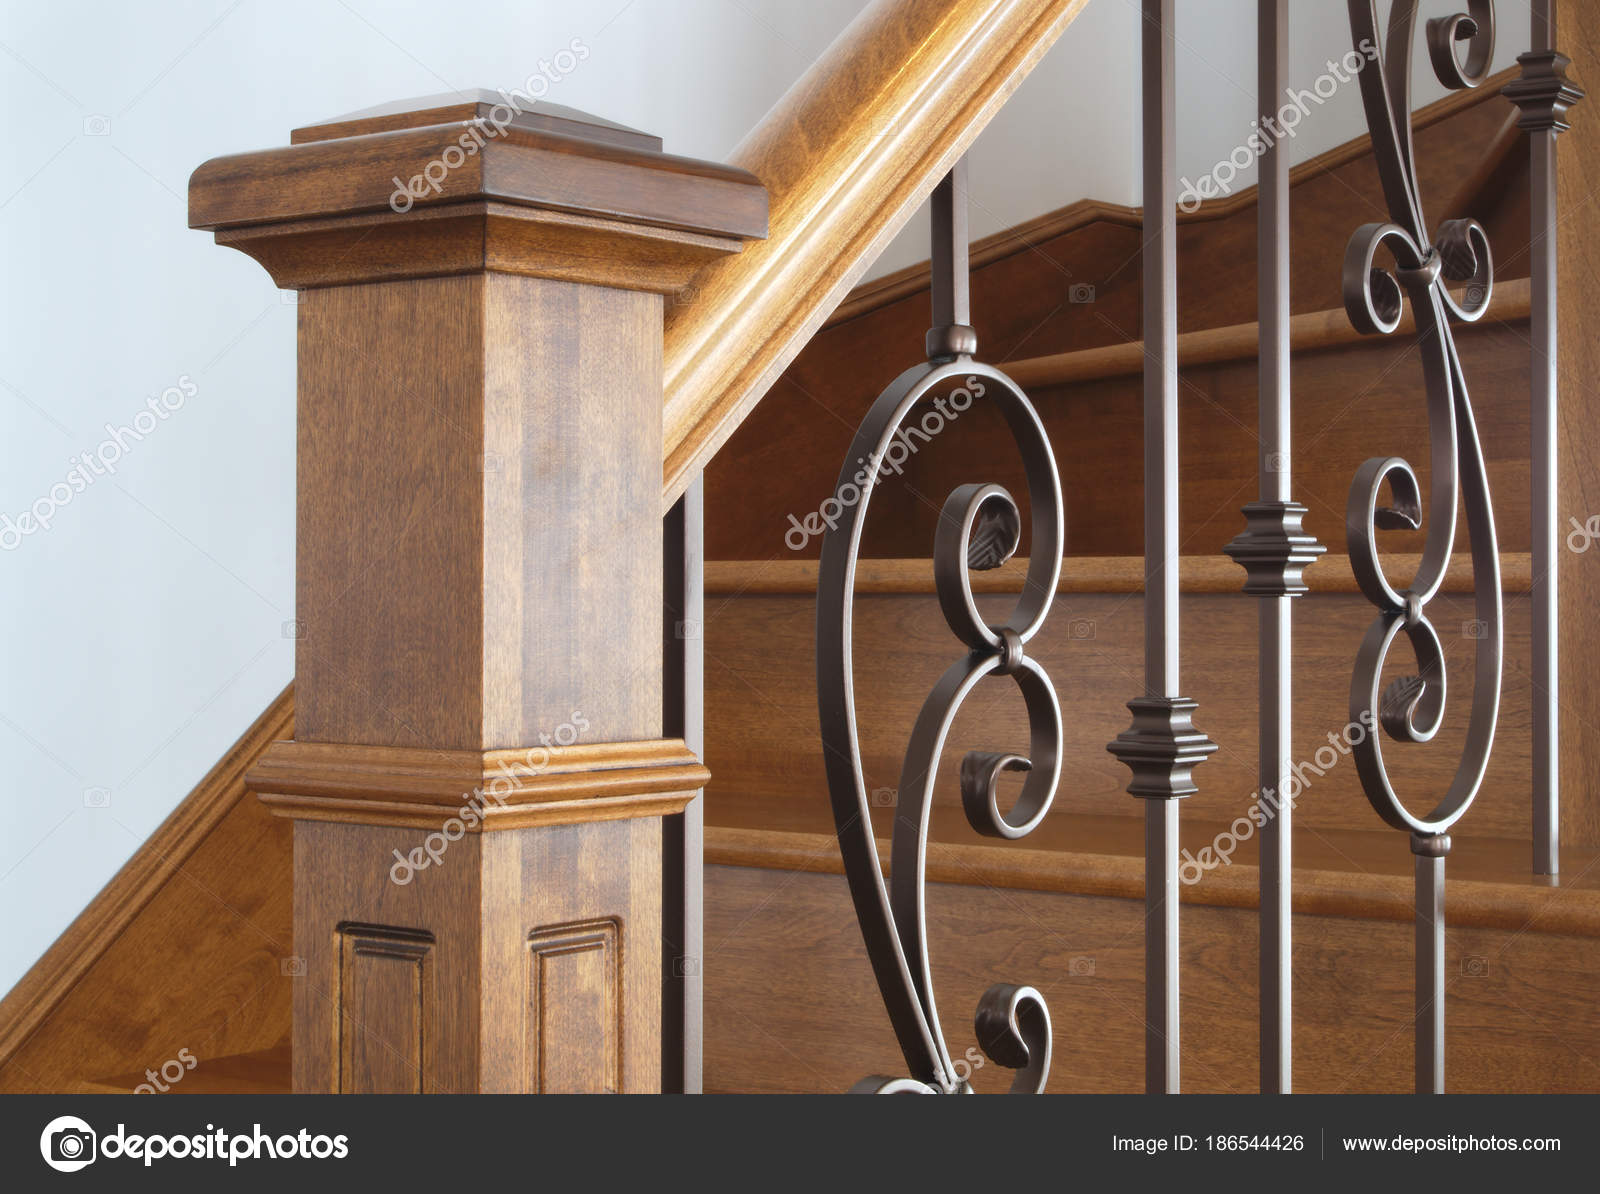 Pictures Wooden Handrails Wood Stairs Newel Handrail